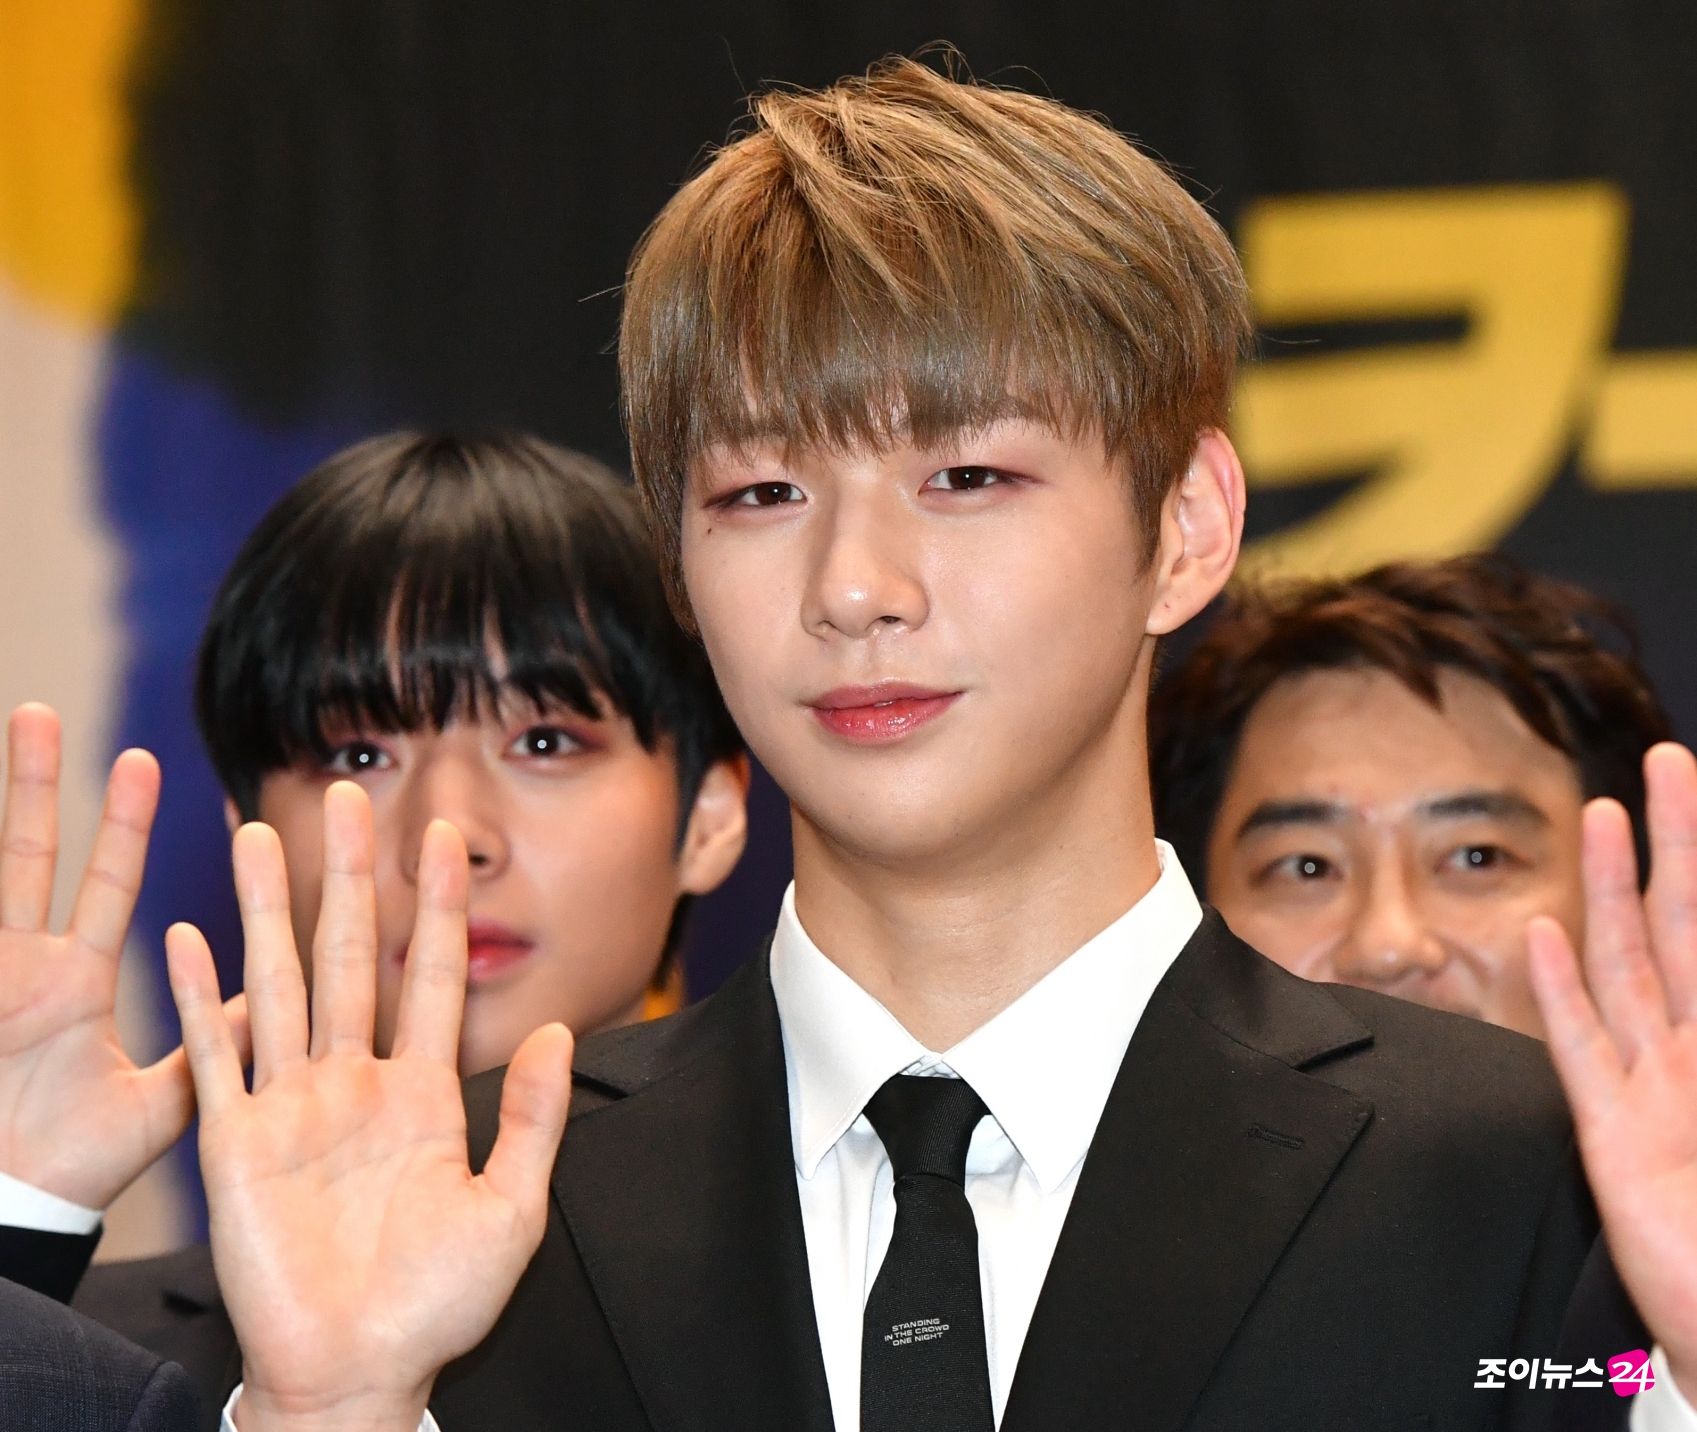 Group Wanna One Kang Daniel attended the 2018 National Brand Conference held at the Yeouido National Assembly Hall in Seoul on the afternoon of the 5th and took a commemorative photo after winning the National Brand Award in the Cultural Revolution category.Violinist Jung Kyung-hwa was selected for the 2018 National Brand Grand Prize, idol group Wanna One for the Cultural Revolution, and PyeongChang 2018 Olympic Winter Games closing Skeleton gold medalist Yoon Sung-bin for the sports category.